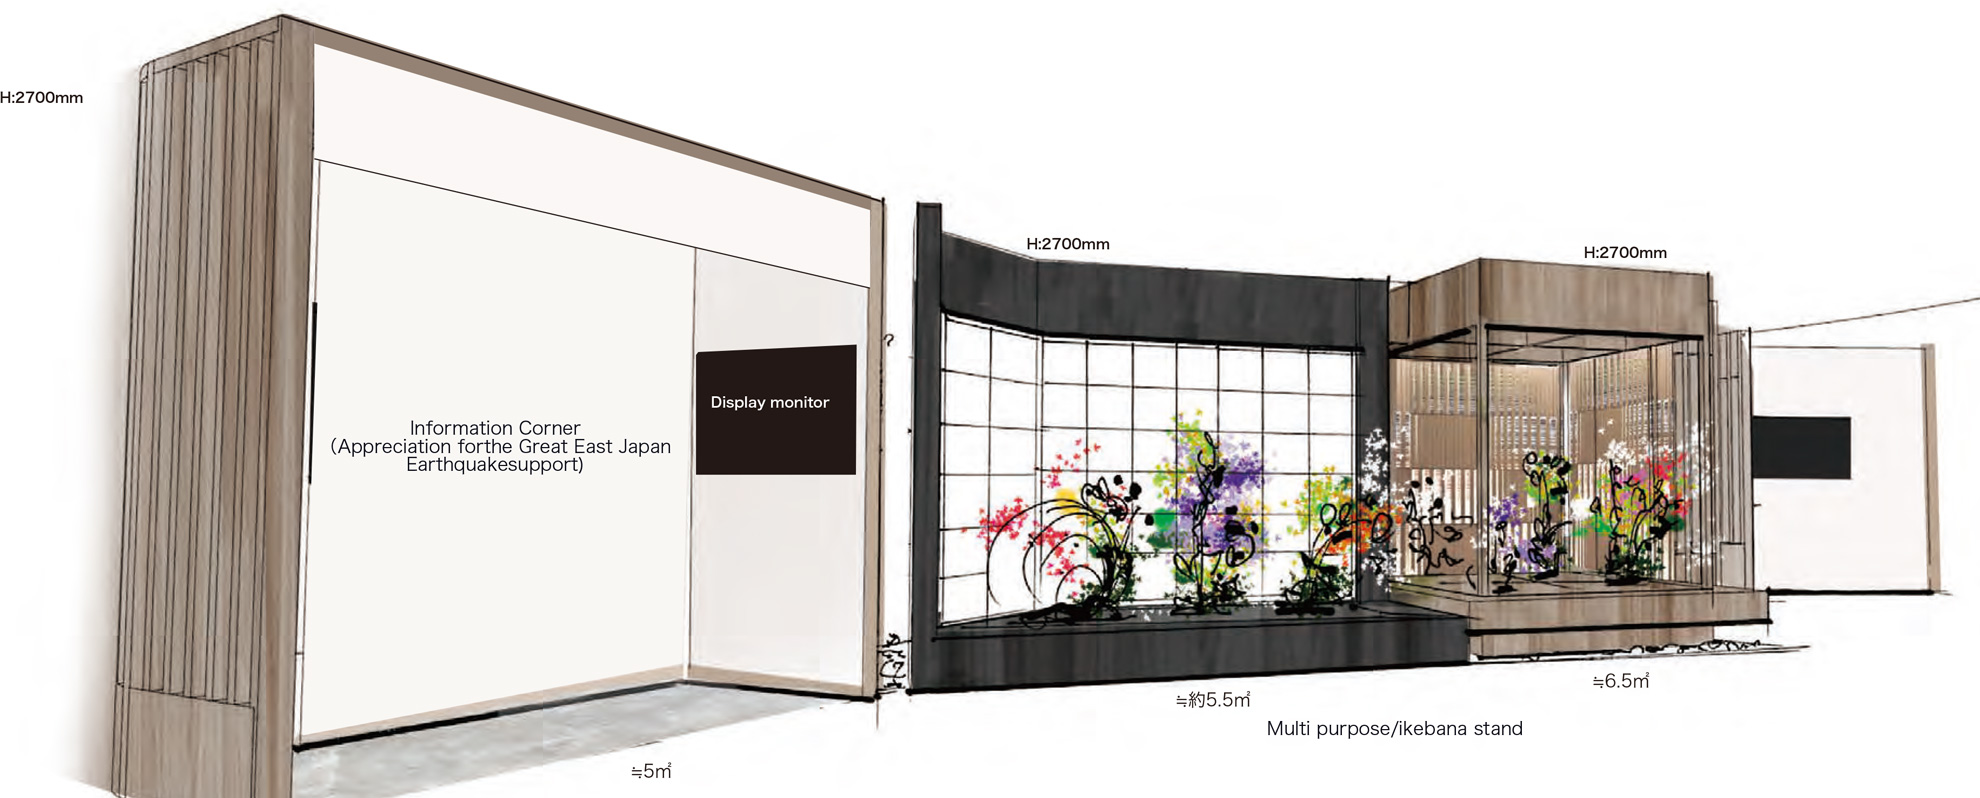 Multi-purpose ikebana display stand / Information displays / Displays of plants and flowers for contest and export promotion: Image 1